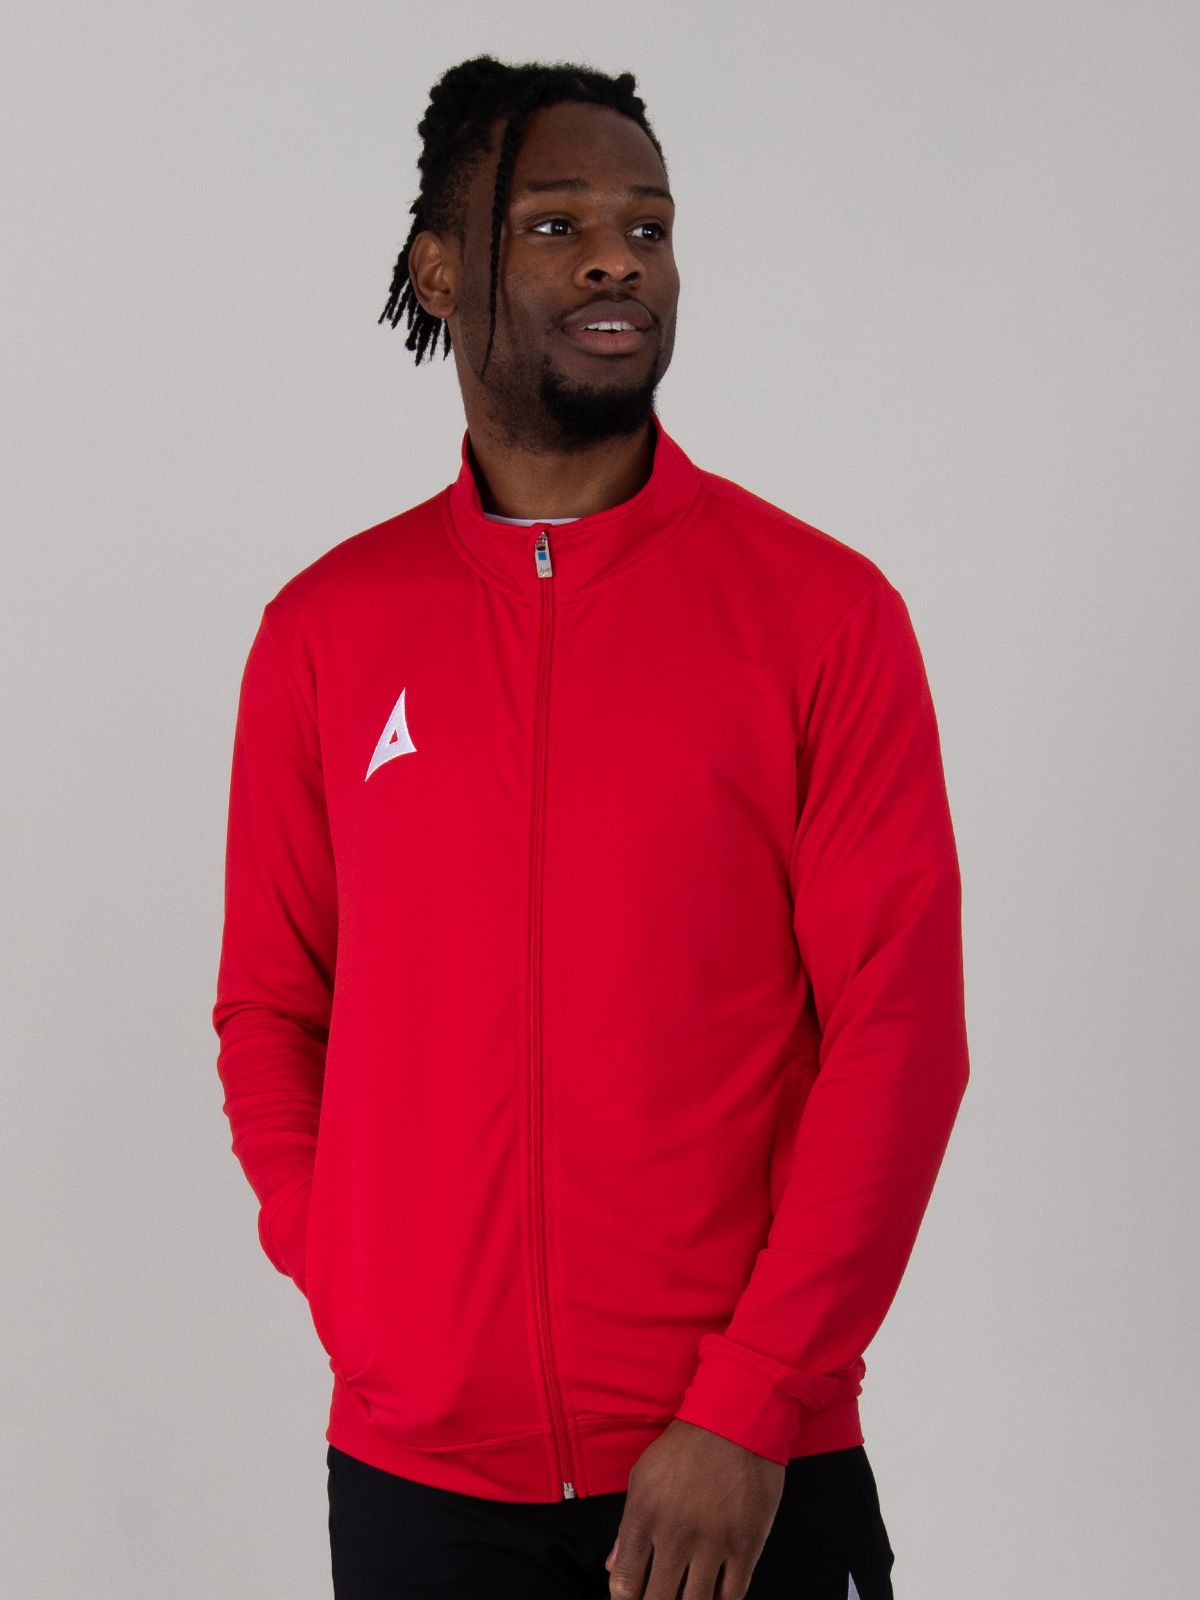 a model wearing an avec red full zip tracksuit jacket made of polyester